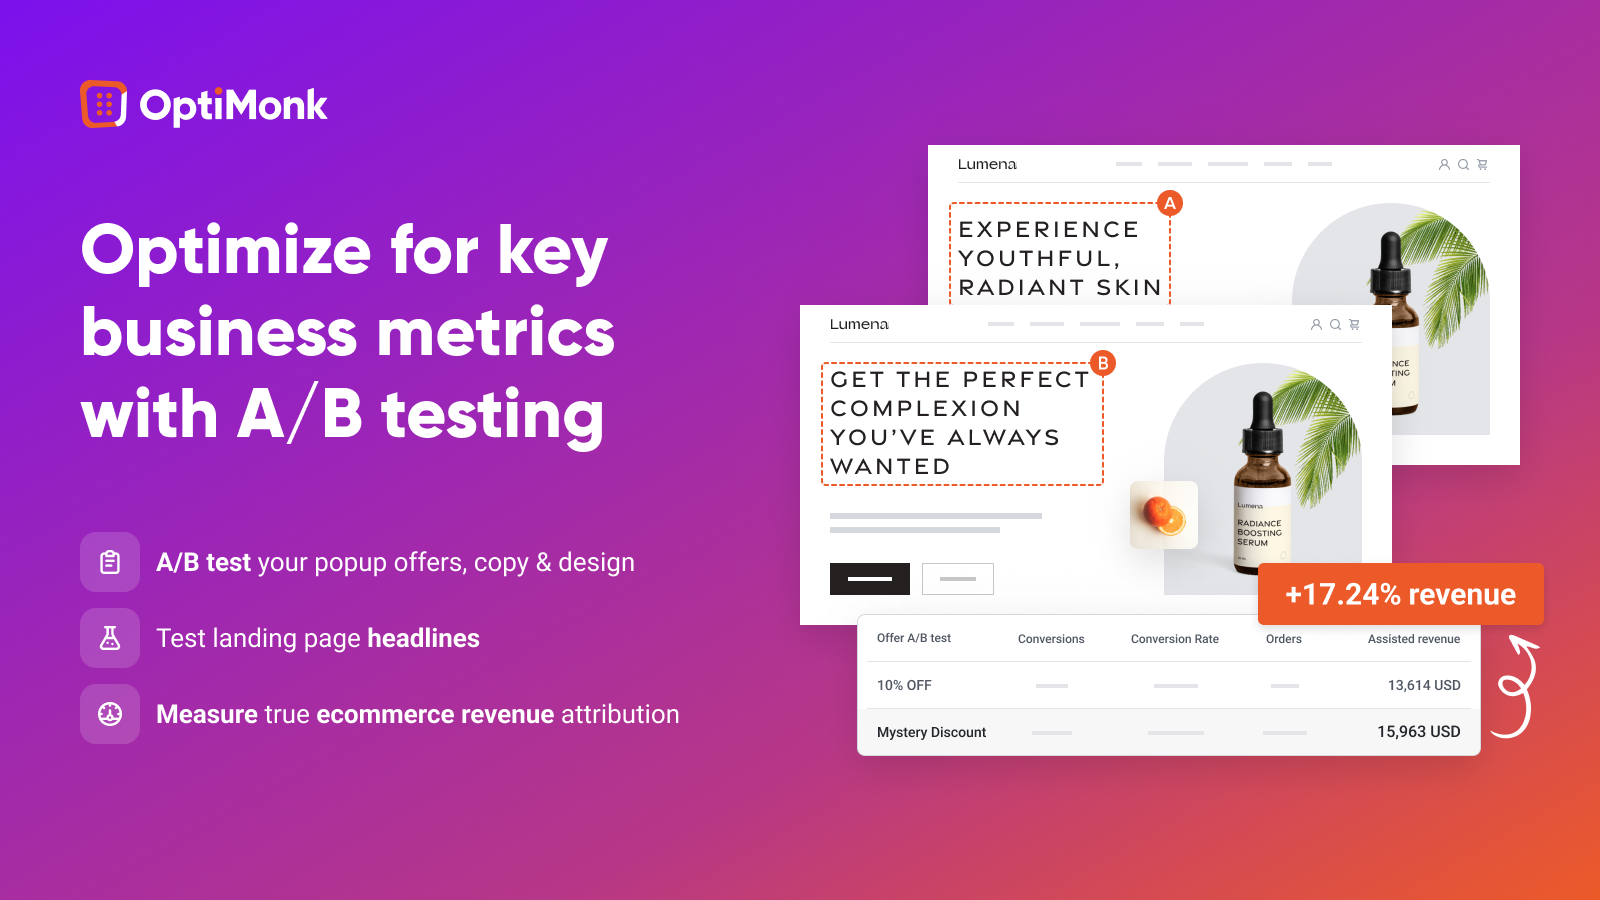 Maximize conversions with quick and simple A/B testing. Launch new experiments in seconds and find the best headlines, offers while you track real revenue attribution.